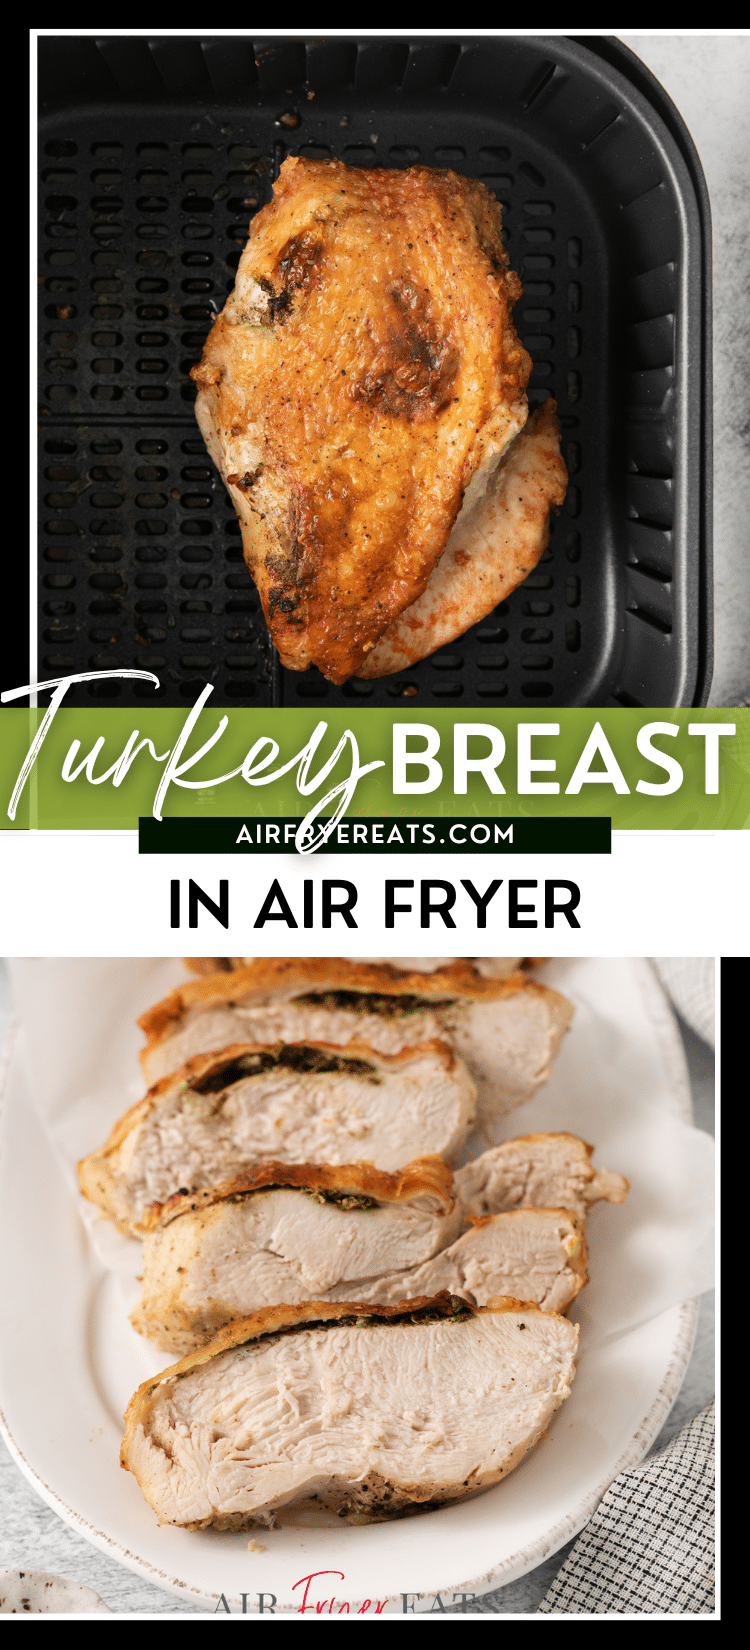 two images of turkey breast. Text in center says "turkey breast in air fryer" via @vegetarianmamma